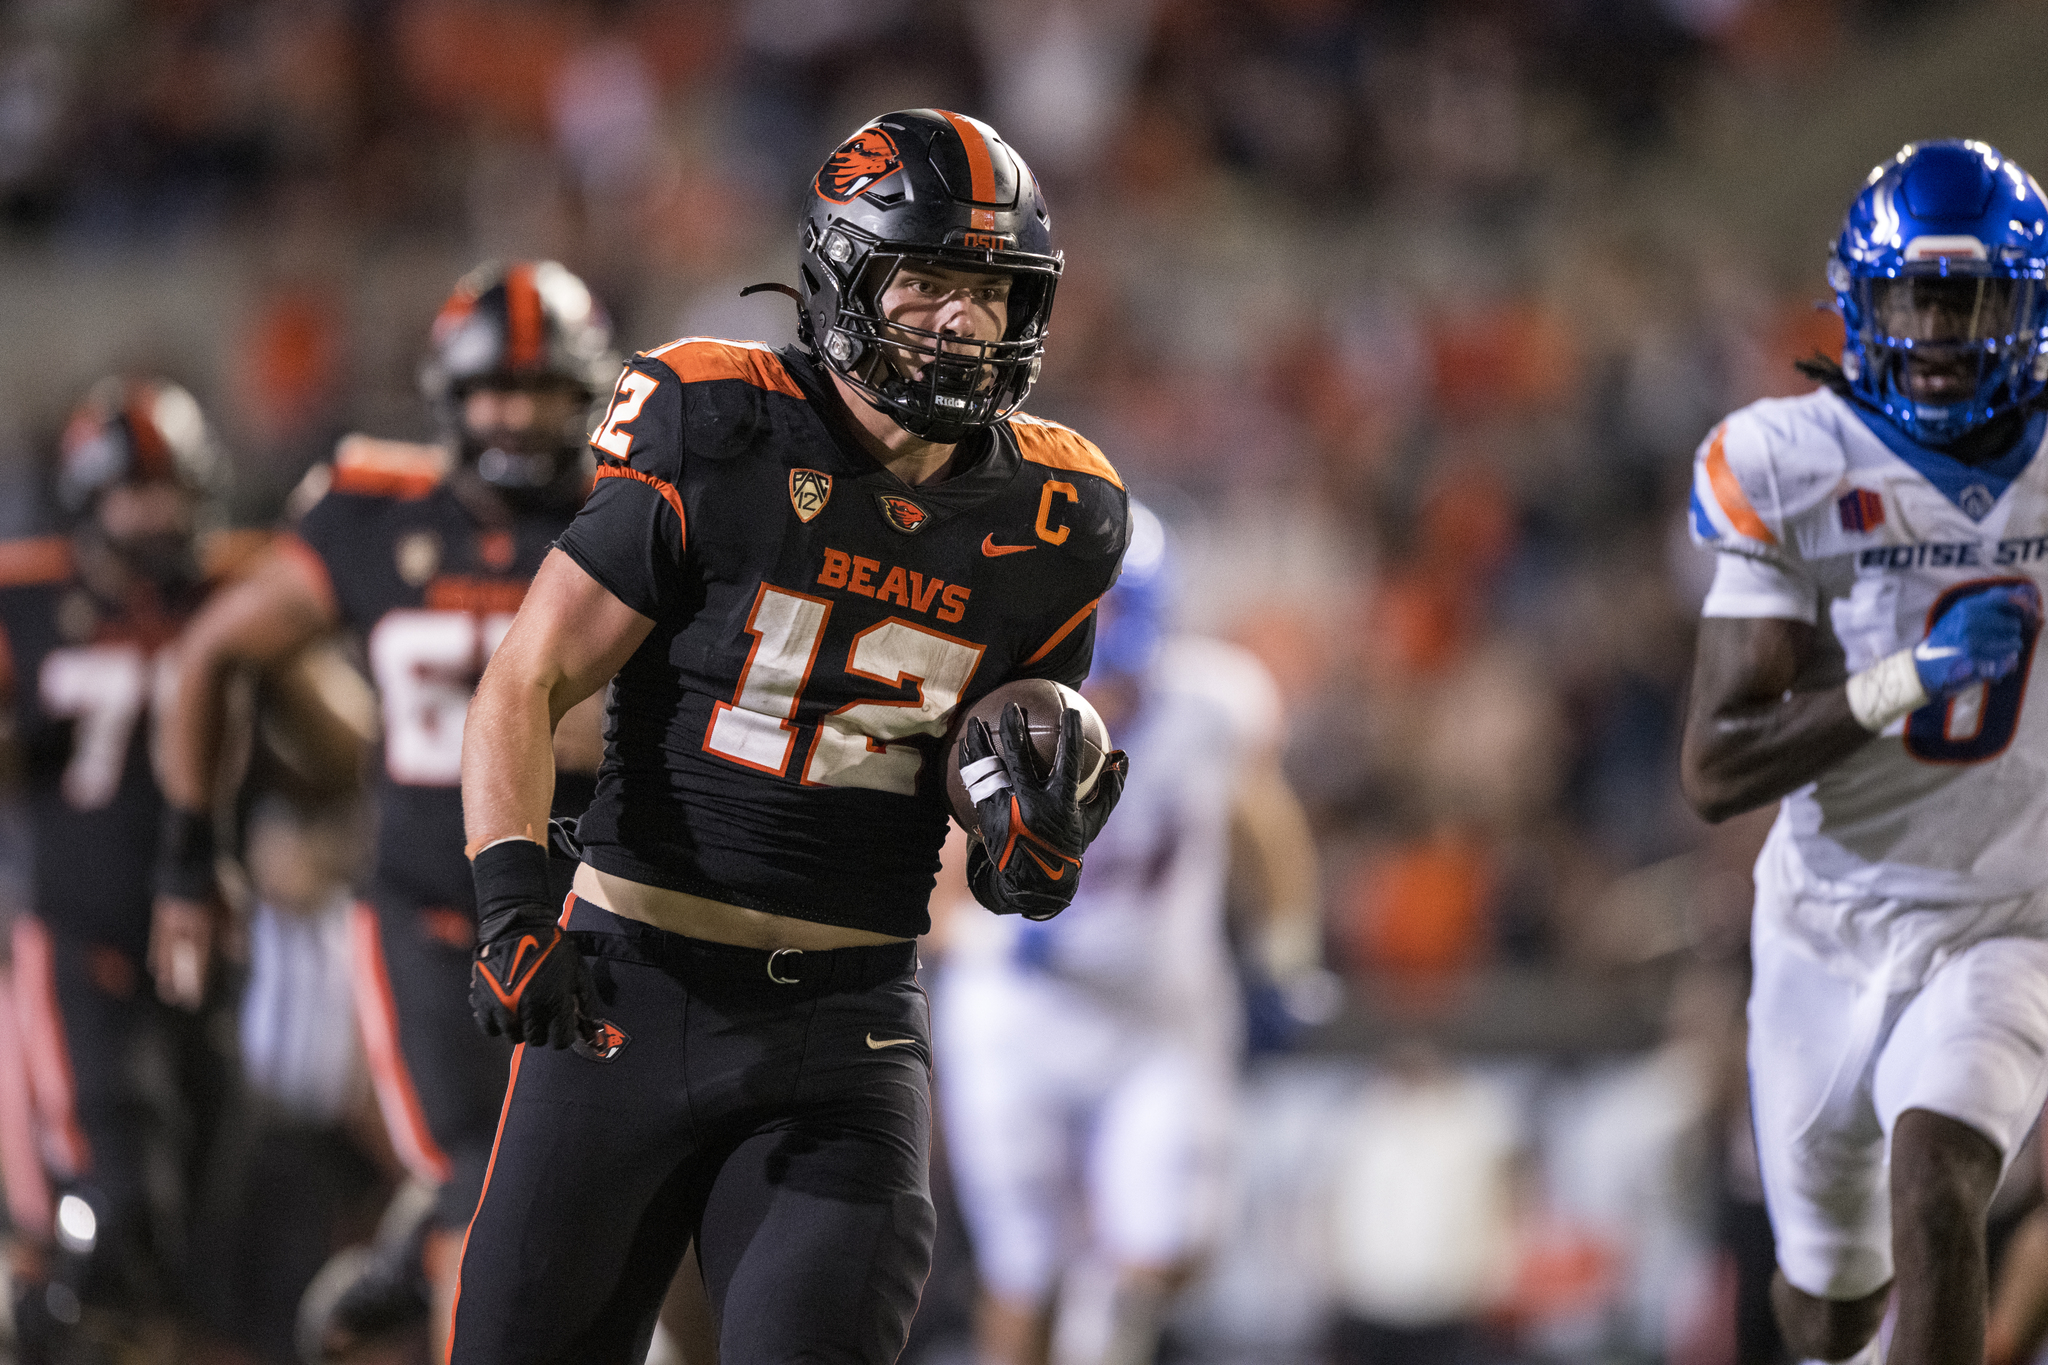 Oregon State's Jack Colletto signs with San Francisco 49ers